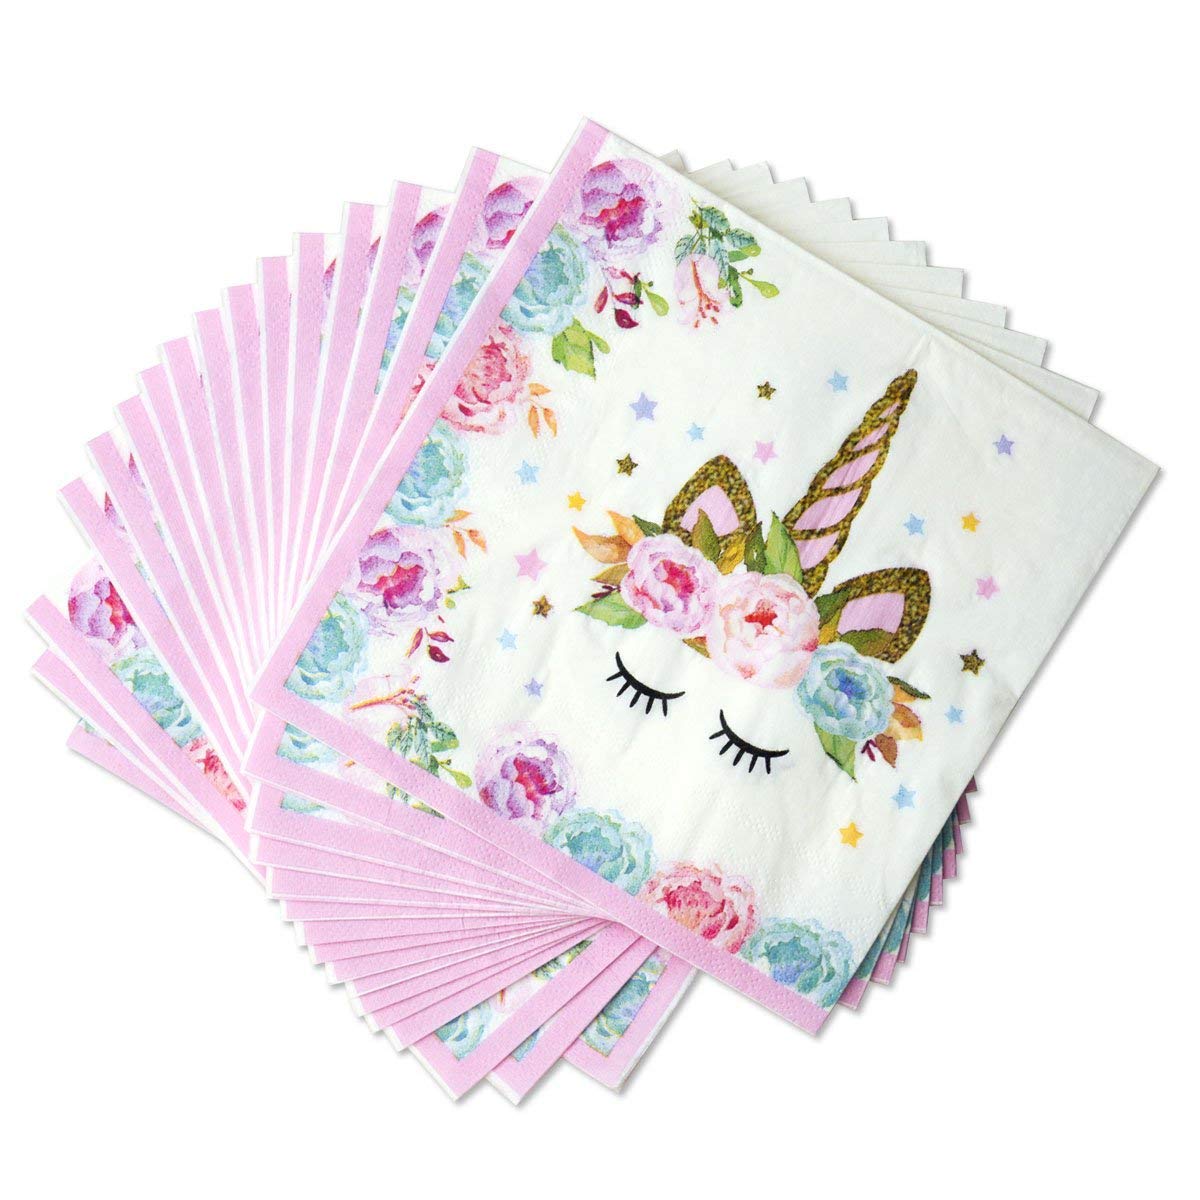 Little Unicorn Paper Napkins For Unicorn Birthday Theme Party and Decoration